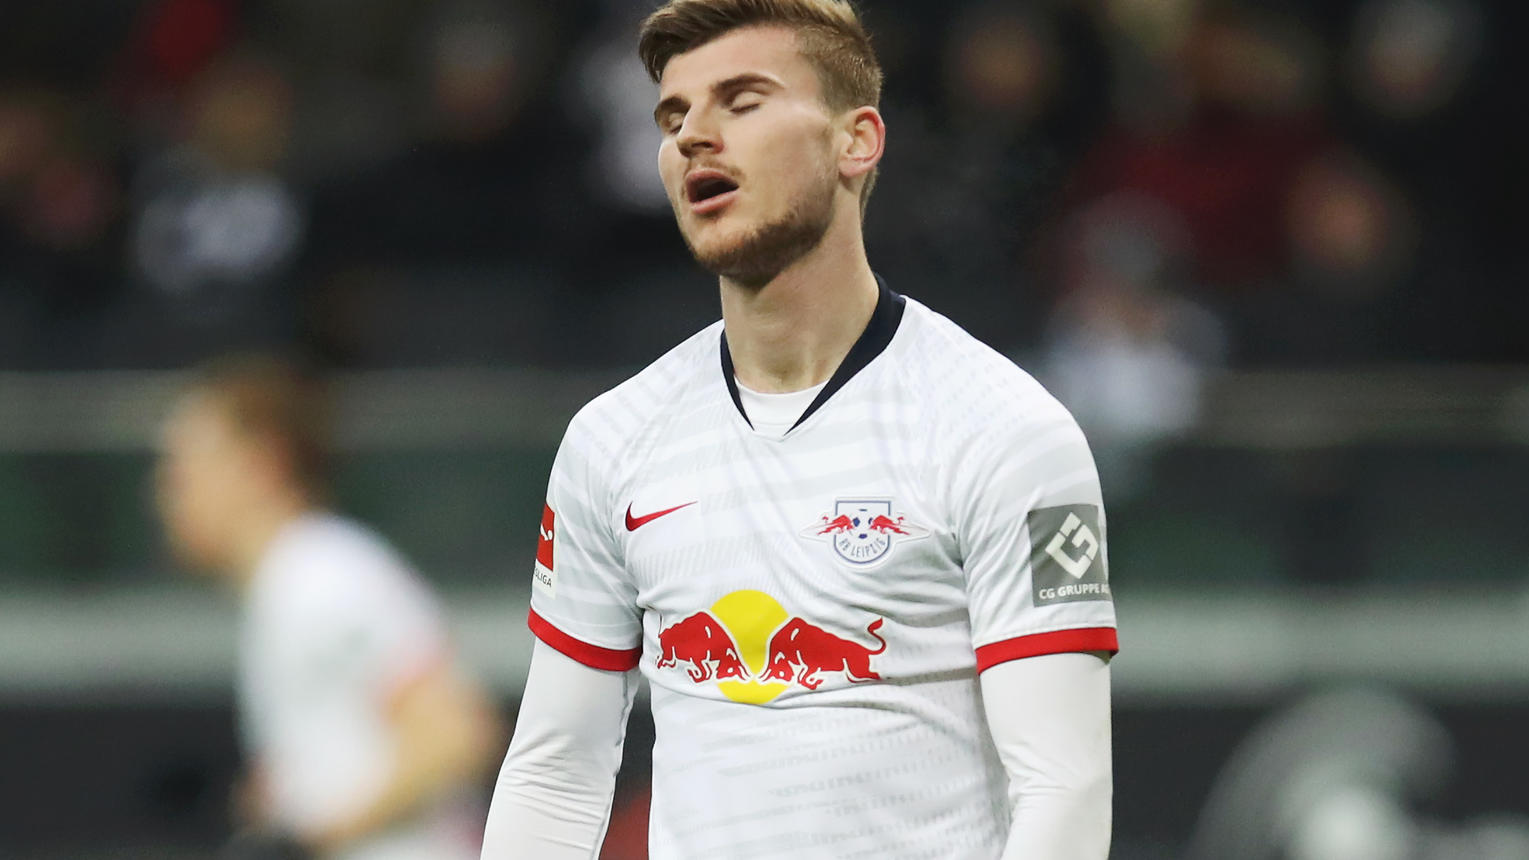 FRANKFURT AM MAIN, GERMANY - JANUARY 25: Timo Werner of RB Leipzig reacts during the Bundesliga match between Eintracht Frankfurt and RB Leipzig at Commerzbank-Arena on January 25, 2020 in Frankfurt am Main, Germany. (Photo by Alex Grimm/Bongarts/Get